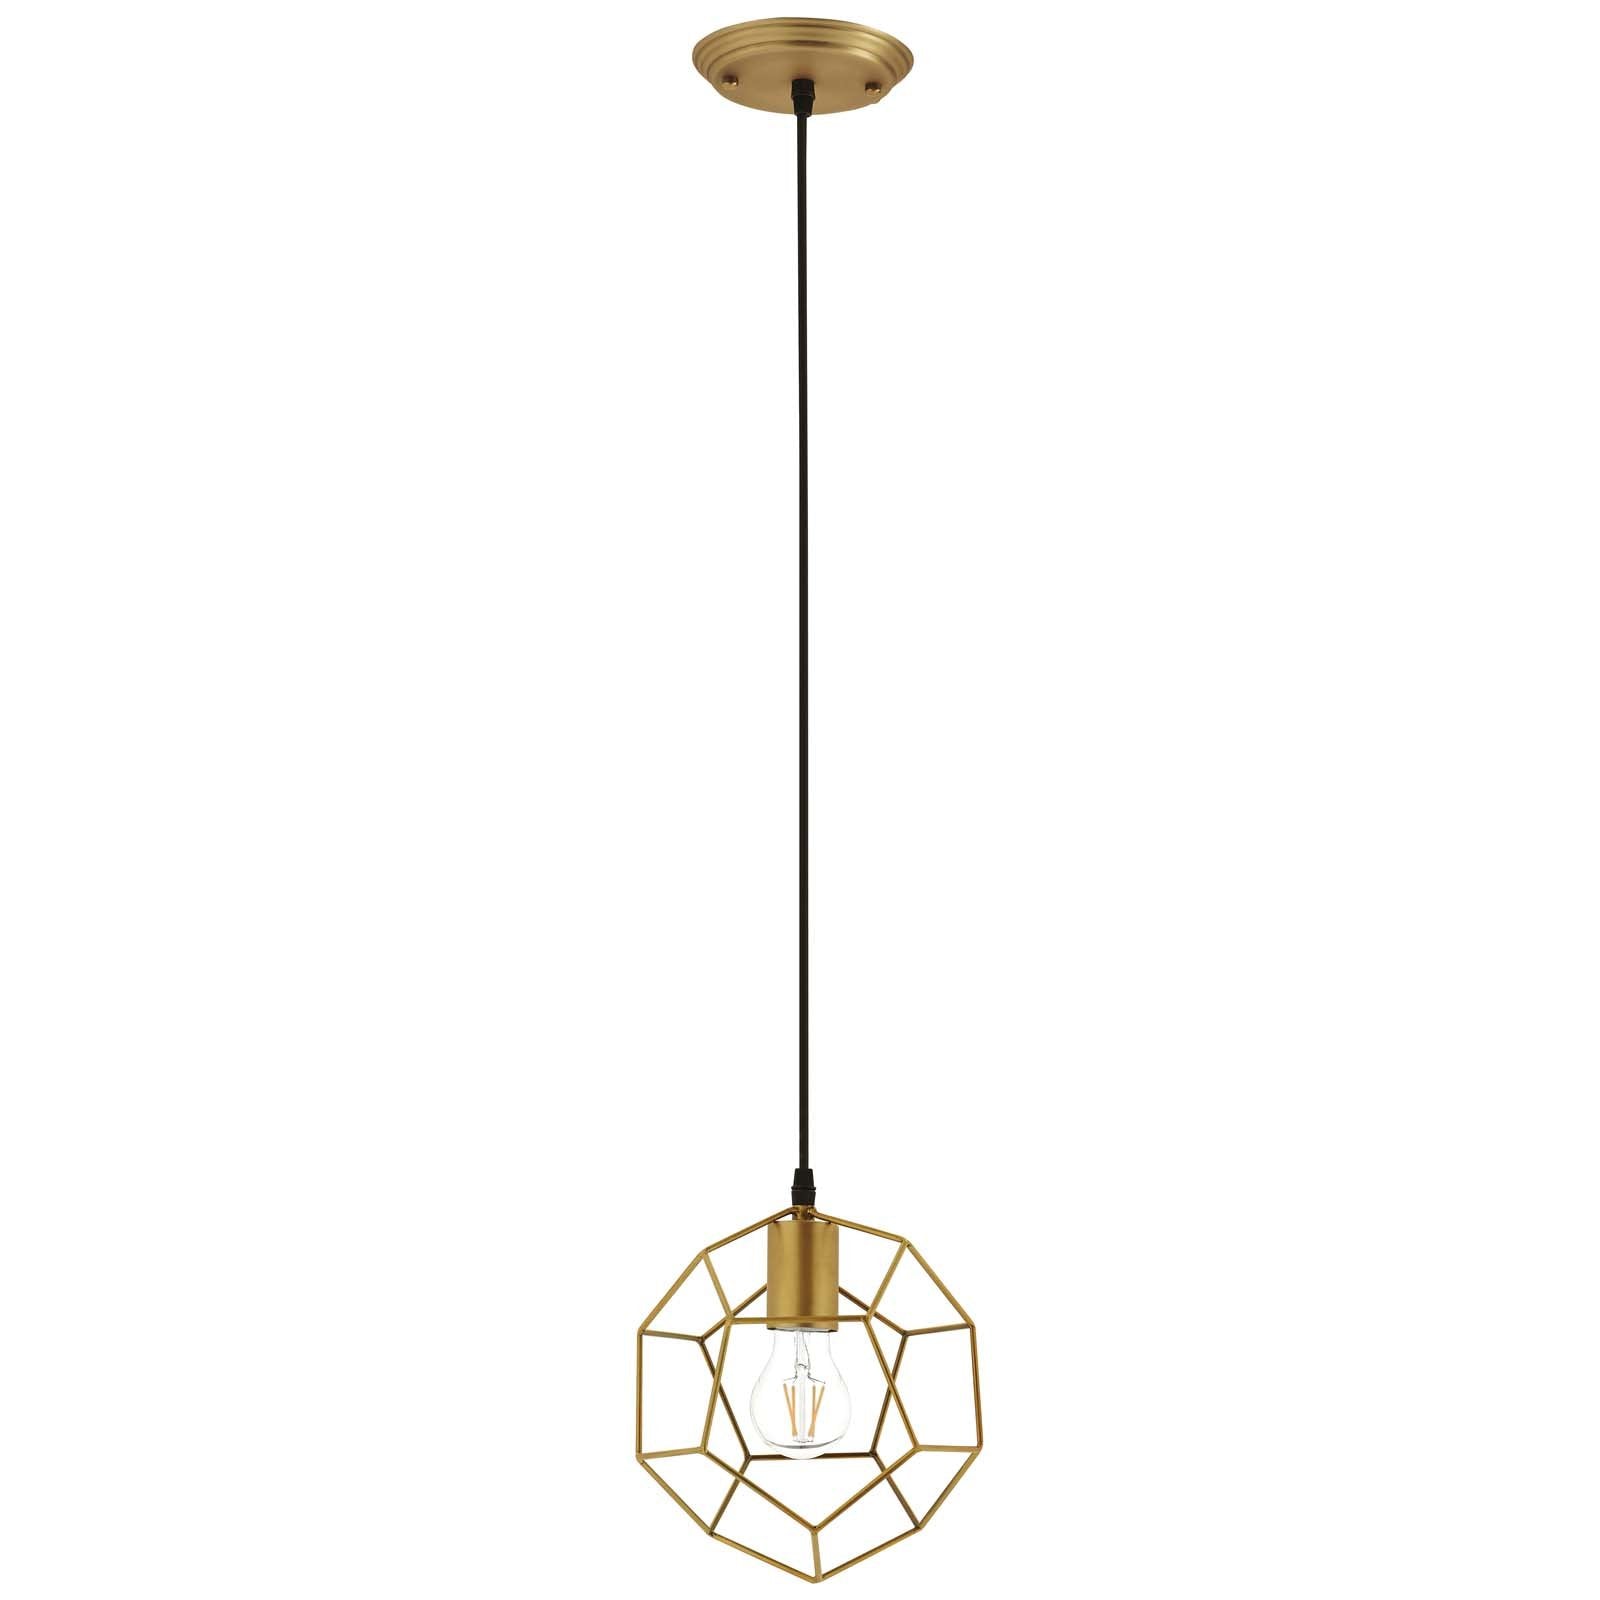 Pique Gold Metal Ceiling Fixture - East Shore Modern Home Furnishings